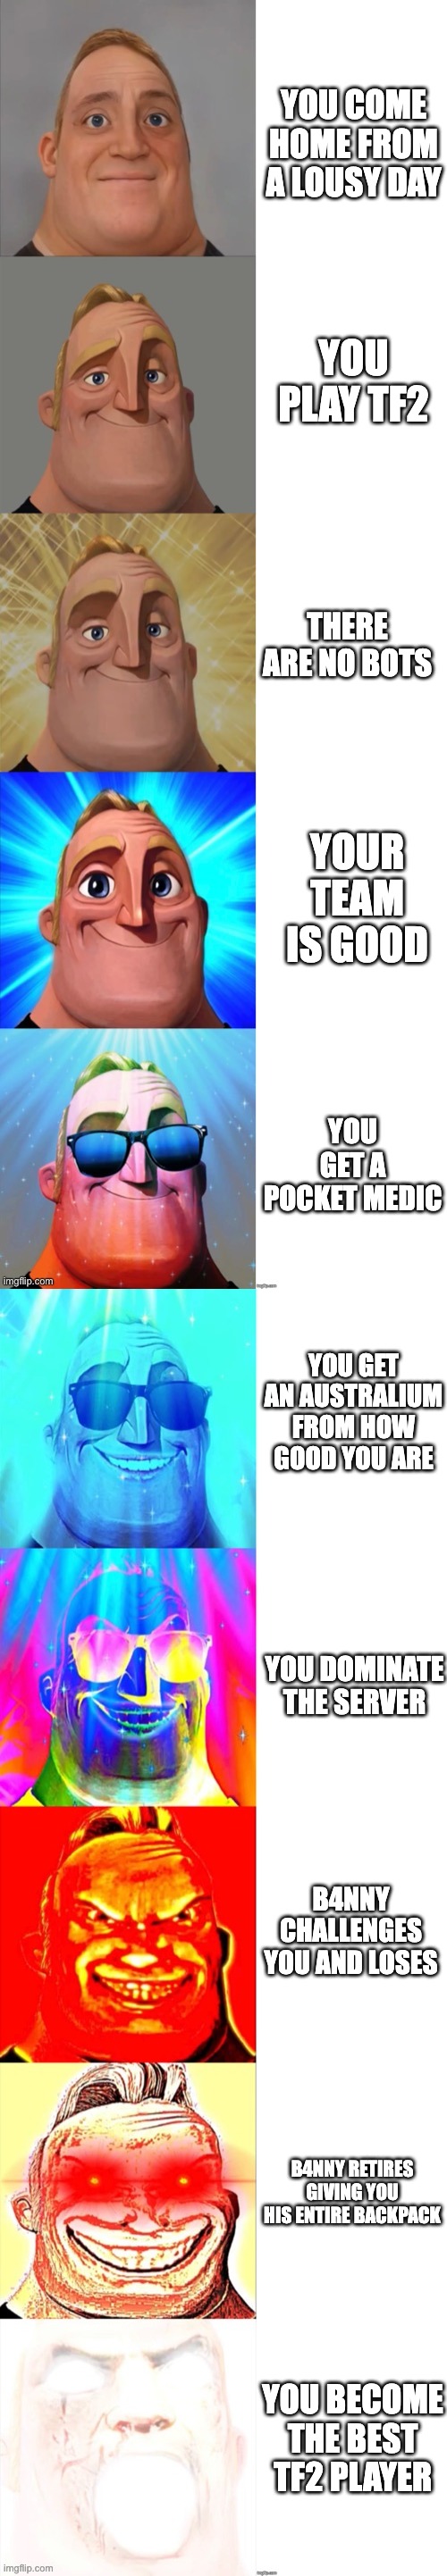 Mr Incredible Becoming Canny | YOU COME HOME FROM A LOUSY DAY; YOU PLAY TF2; THERE ARE NO BOTS; YOUR TEAM IS GOOD; YOU GET A POCKET MEDIC; YOU GET AN AUSTRALIUM FROM HOW GOOD YOU ARE; YOU DOMINATE THE SERVER; B4NNY CHALLENGES YOU AND LOSES; B4NNY RETIRES GIVING YOU HIS ENTIRE BACKPACK; YOU BECOME THE BEST TF2 PLAYER | image tagged in mr incredible becoming canny | made w/ Imgflip meme maker